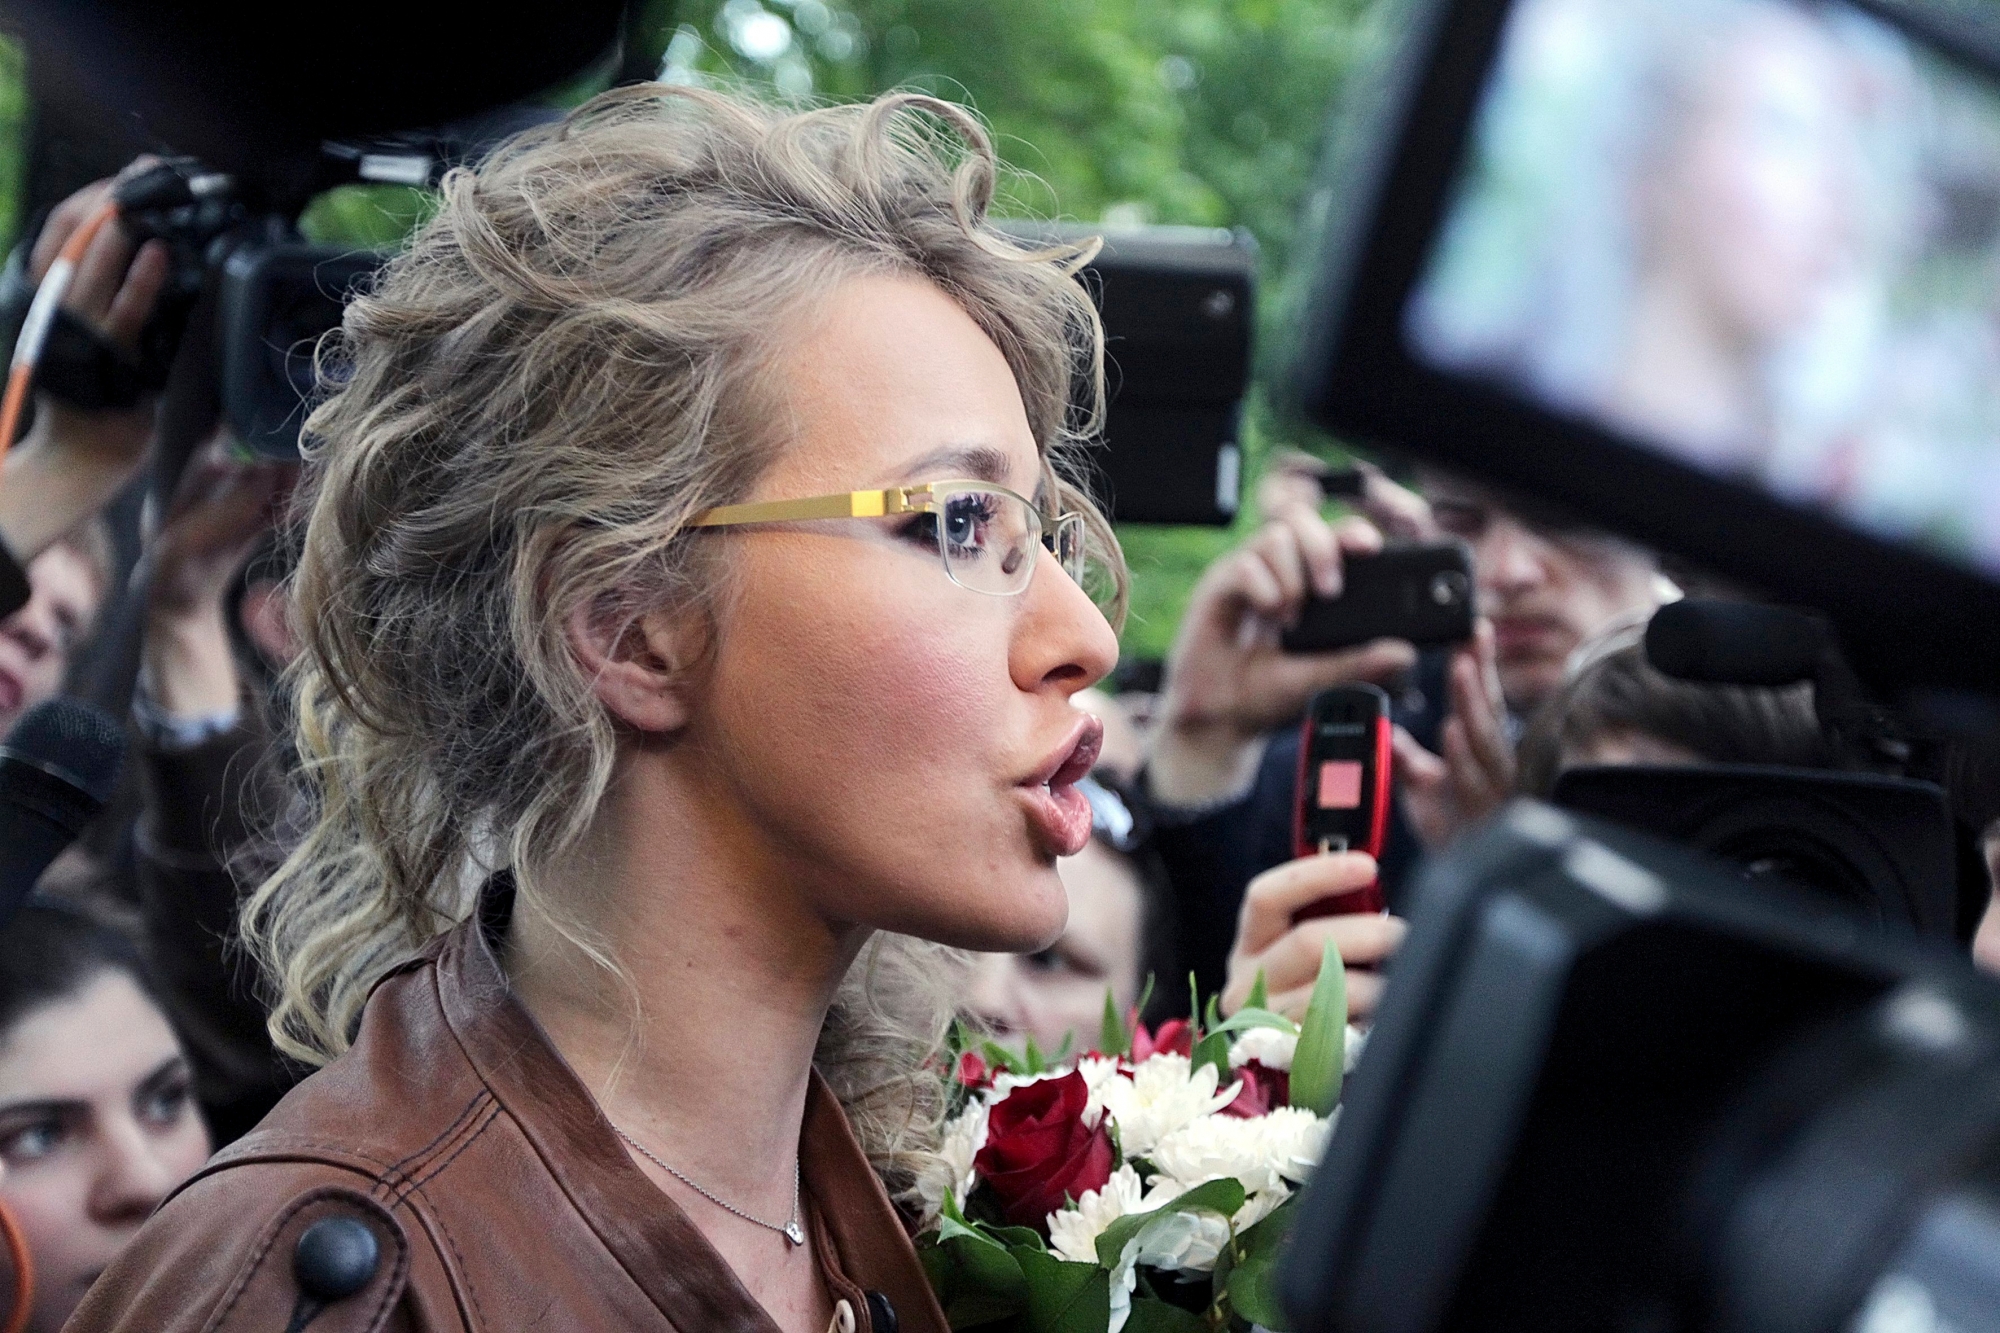 epa06274164 (FILE) File picture dated 11 May 2012 shows TV host and opposition activist Ksenia Sobchak during a protest against the inauguration of Vladimir Putin, in Moscow, Russia (reissued 18 October 2017). Ksenia Sobchak announced her decision to run for president of Russia in the March 2018 presidential election.  EPA/MAXIM SHIPENKOV (FILE) RUSSIA SOBCHAK